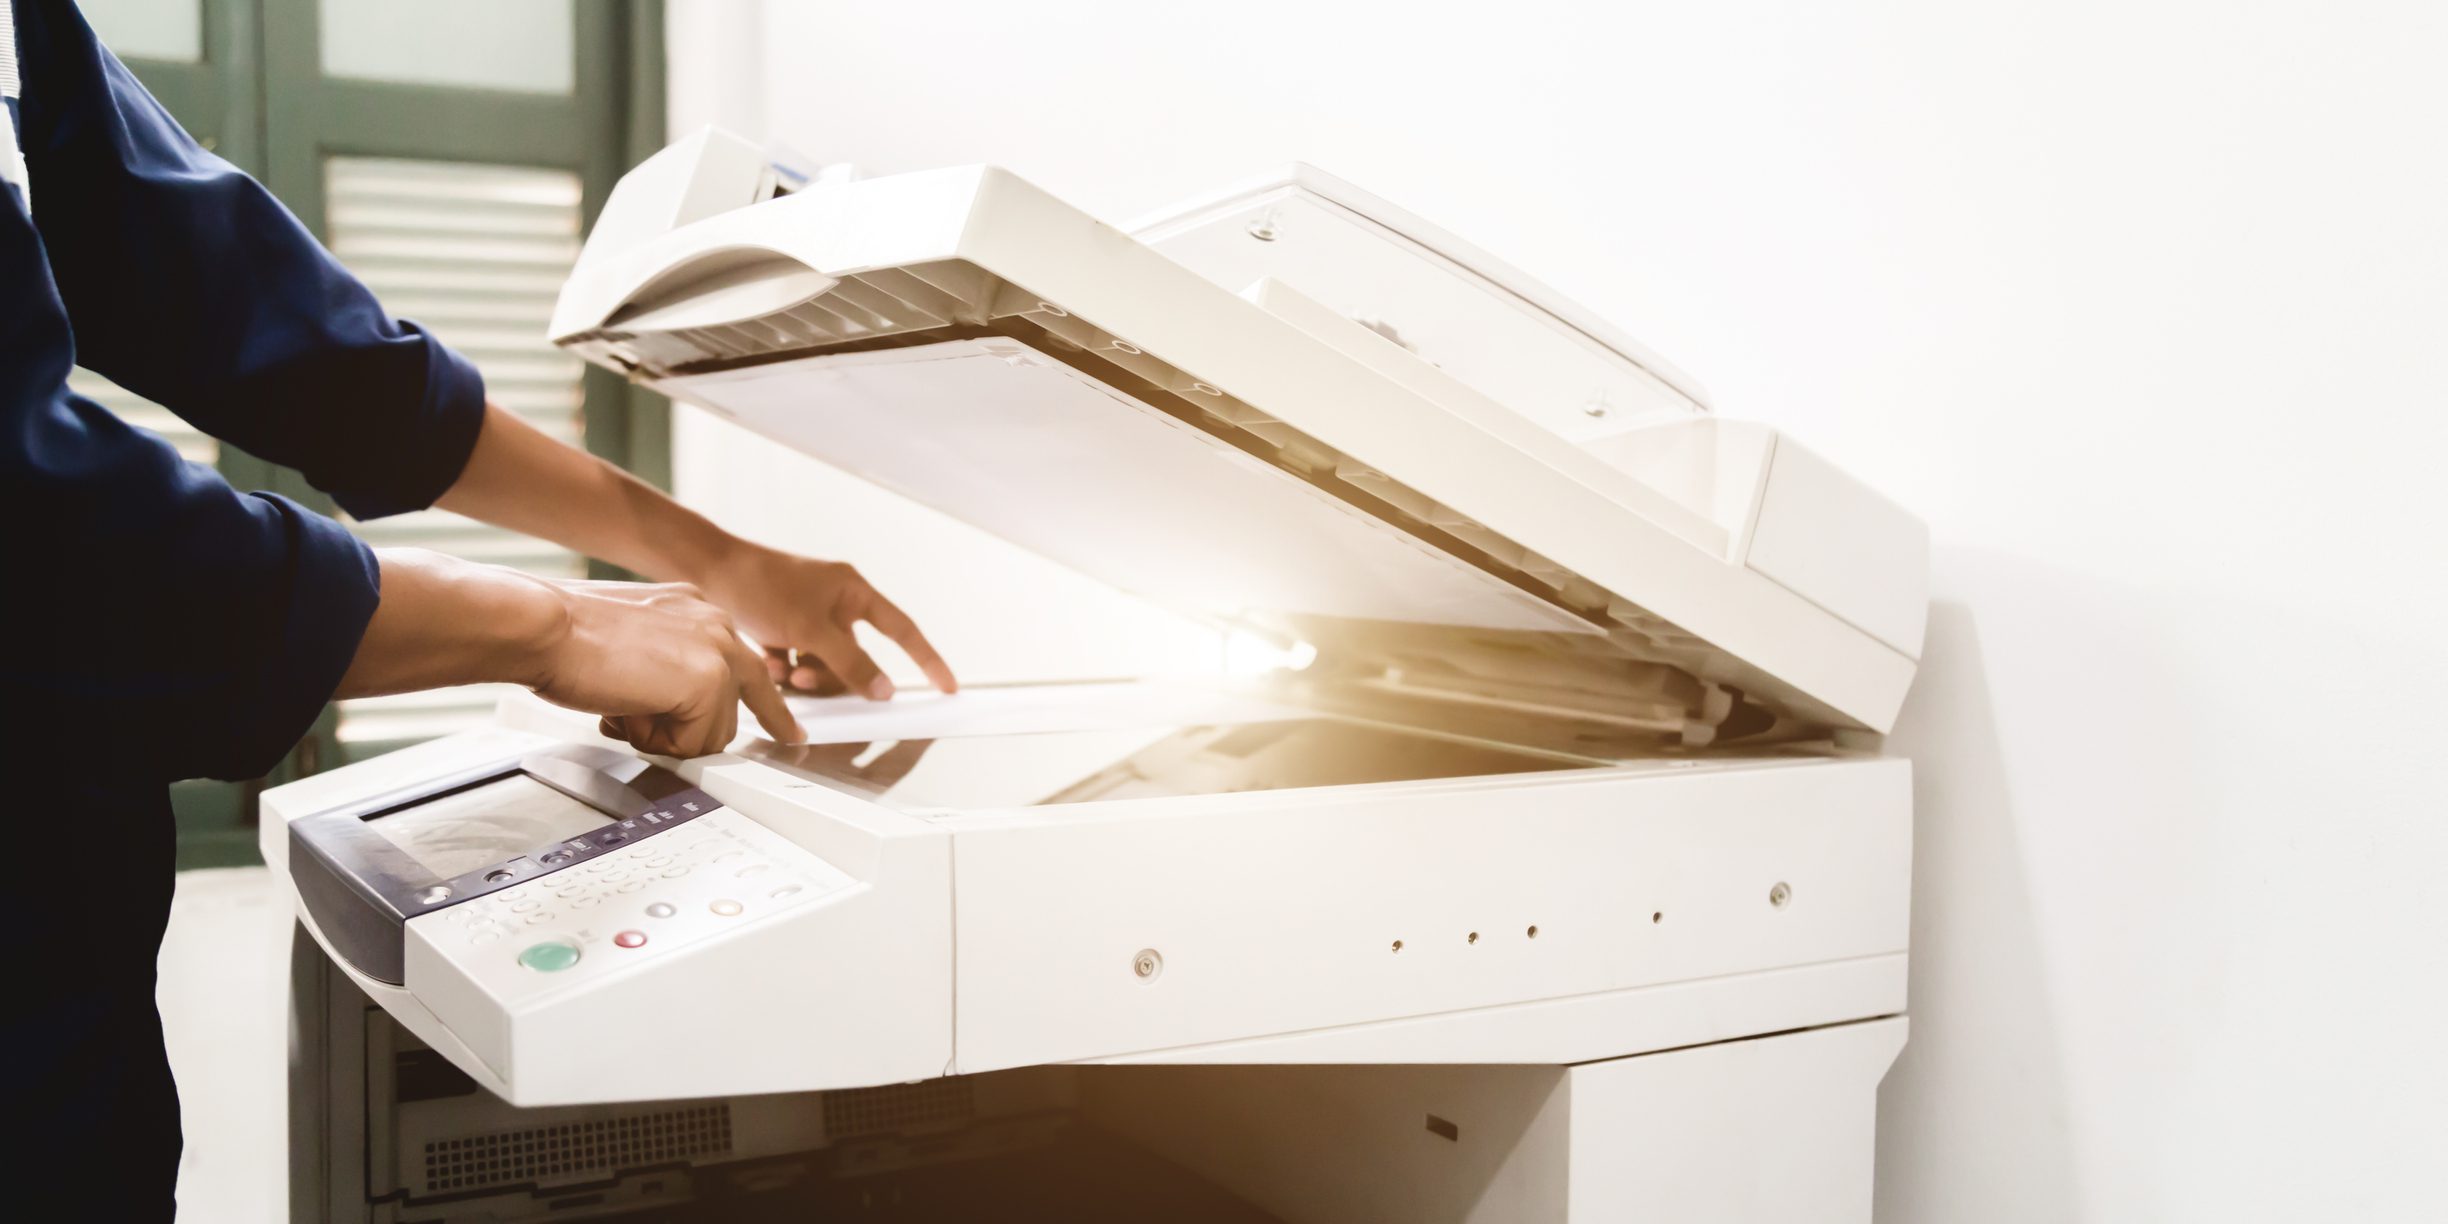 Photo of a photocopier with a person's hands being shown using it